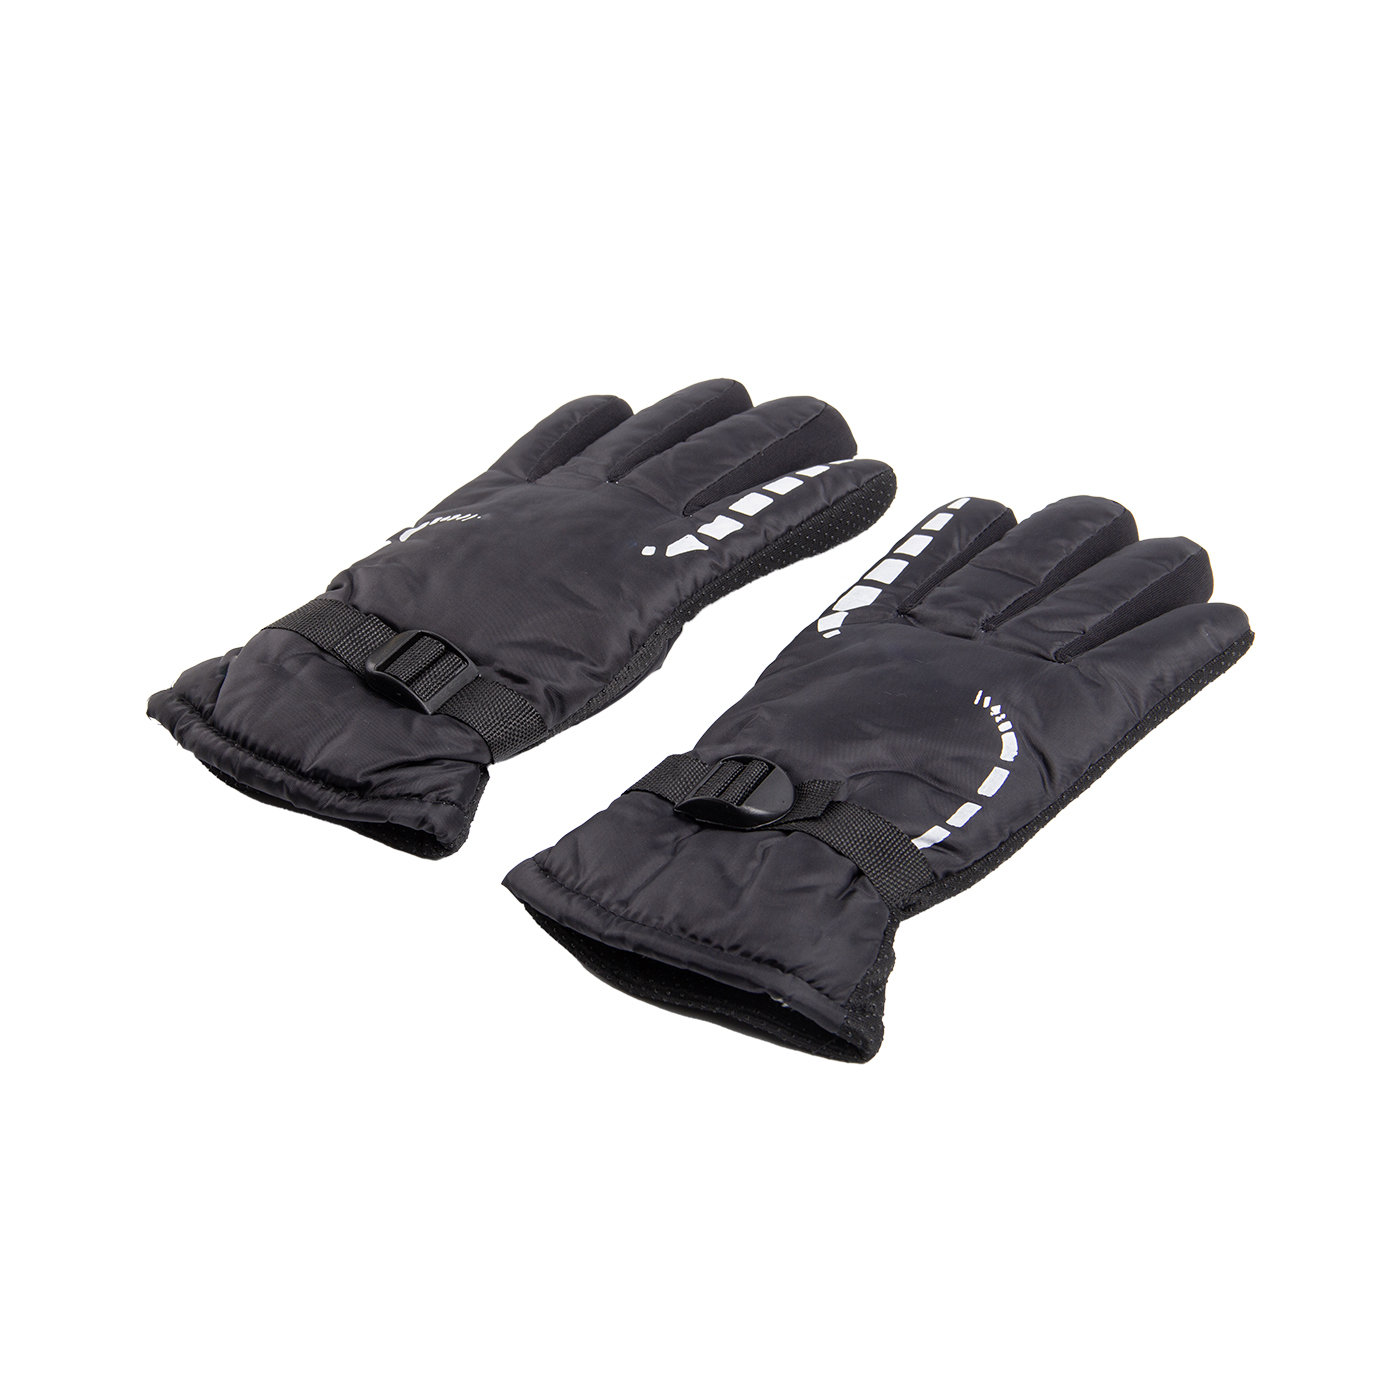 Outdoor Sports Windproof Warm Gloves2